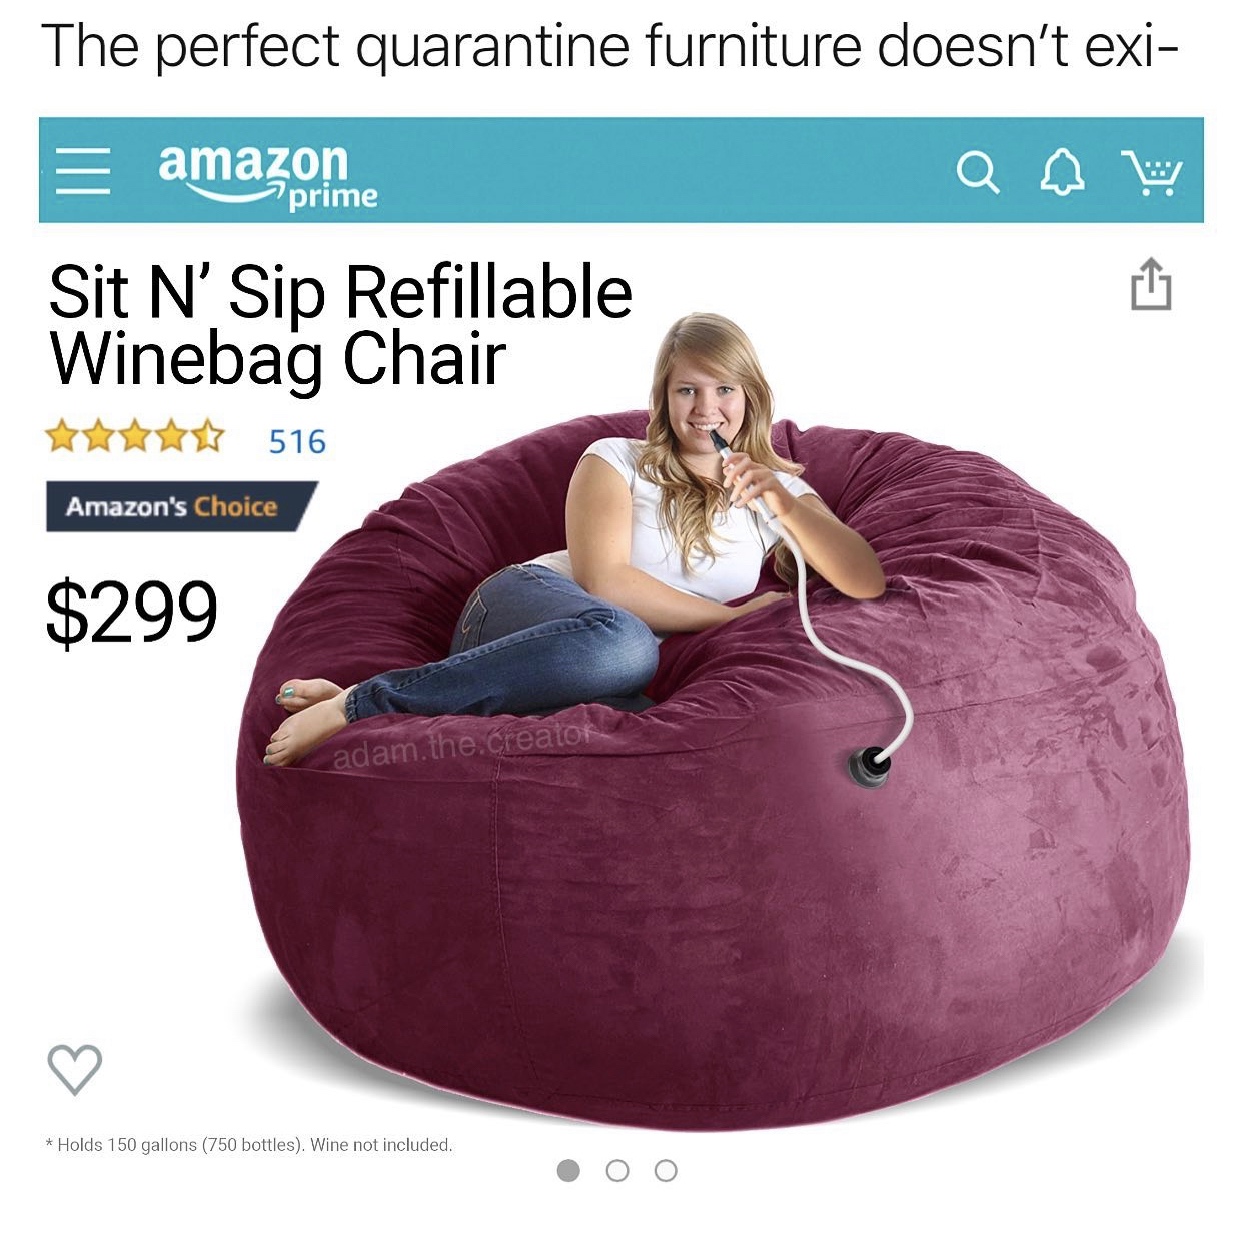 Bean bag chair - The perfect quarantine furniture doesn't exi amazome Sit N'Sip Refillable Winebag Chair Xxxx 516 Amazon's Choice $299 adam.the creator Holds 150 gallons 750 bottles. Wine not included. Oo